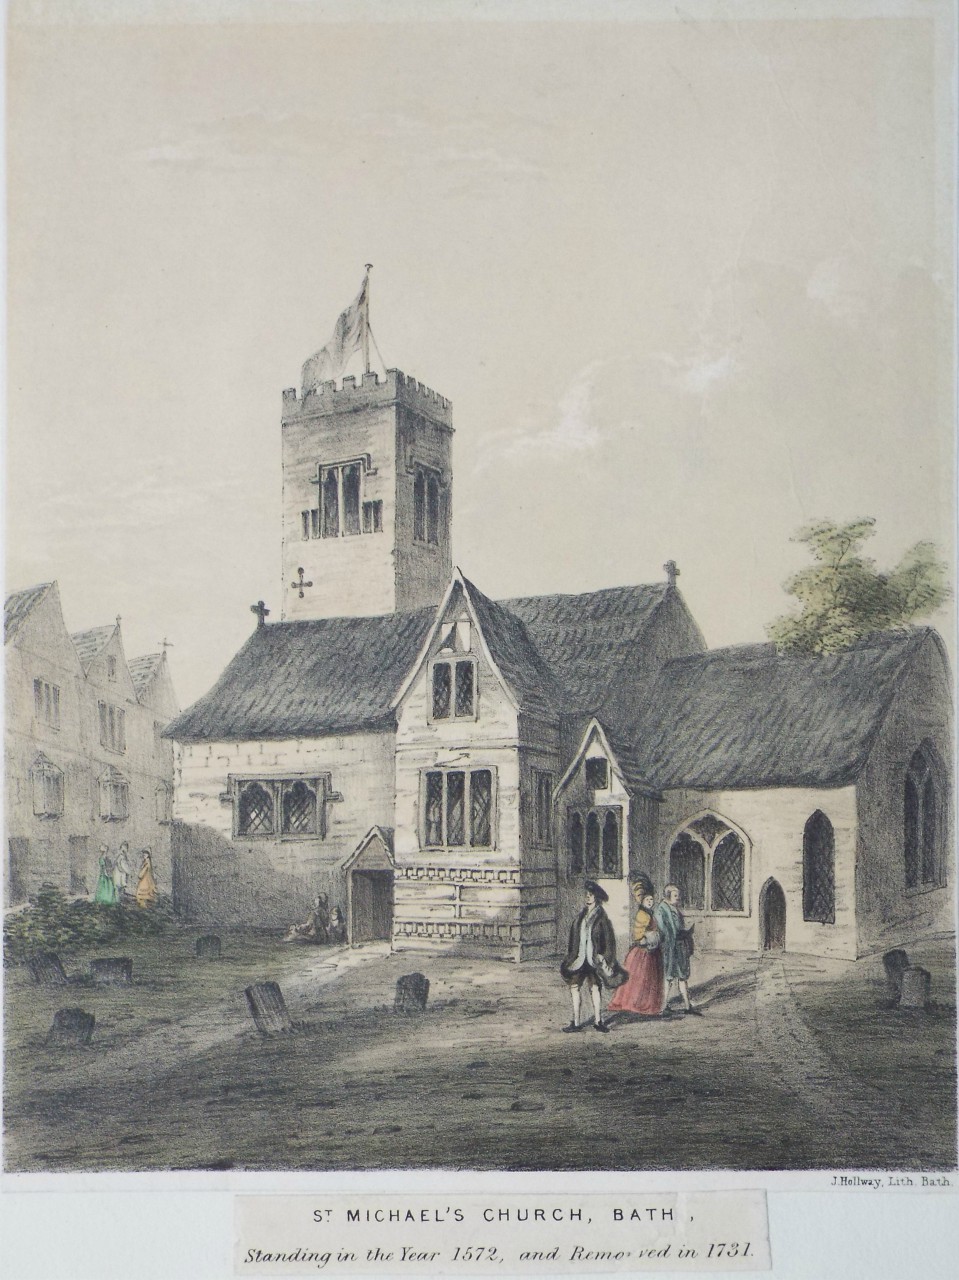 Lithograph - St. Michael's Church, Bath. Standing in the Yrear 1572, and Removed in 1731. - Hollway